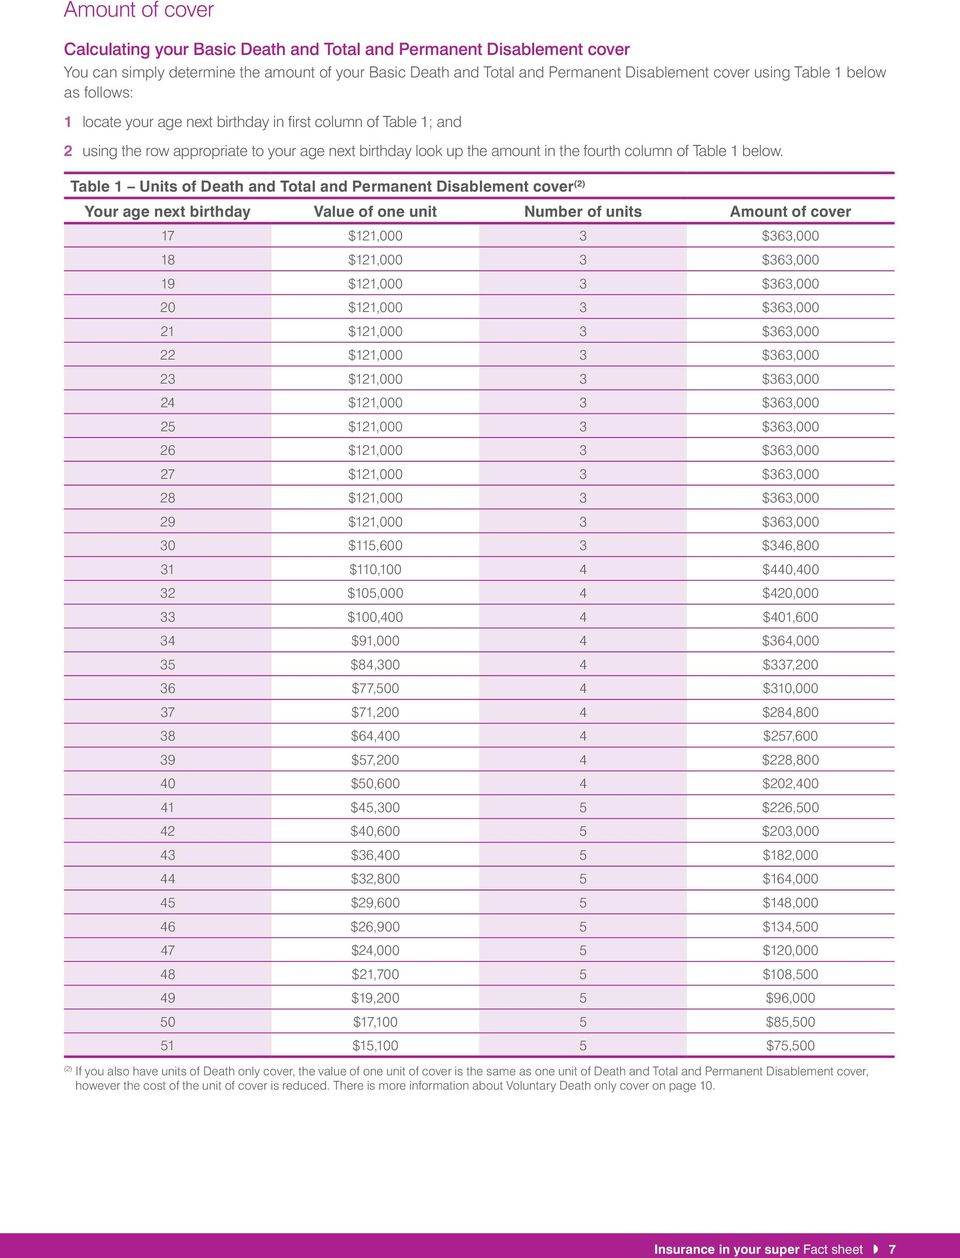 Table 1 Units of Death and Total and Permanent Disablement cover (2) Your age next birthday Value of one unit Number of units Amount of cover 17 $121,000 3 $363,000 18 $121,000 3 $363,000 19 $121,000